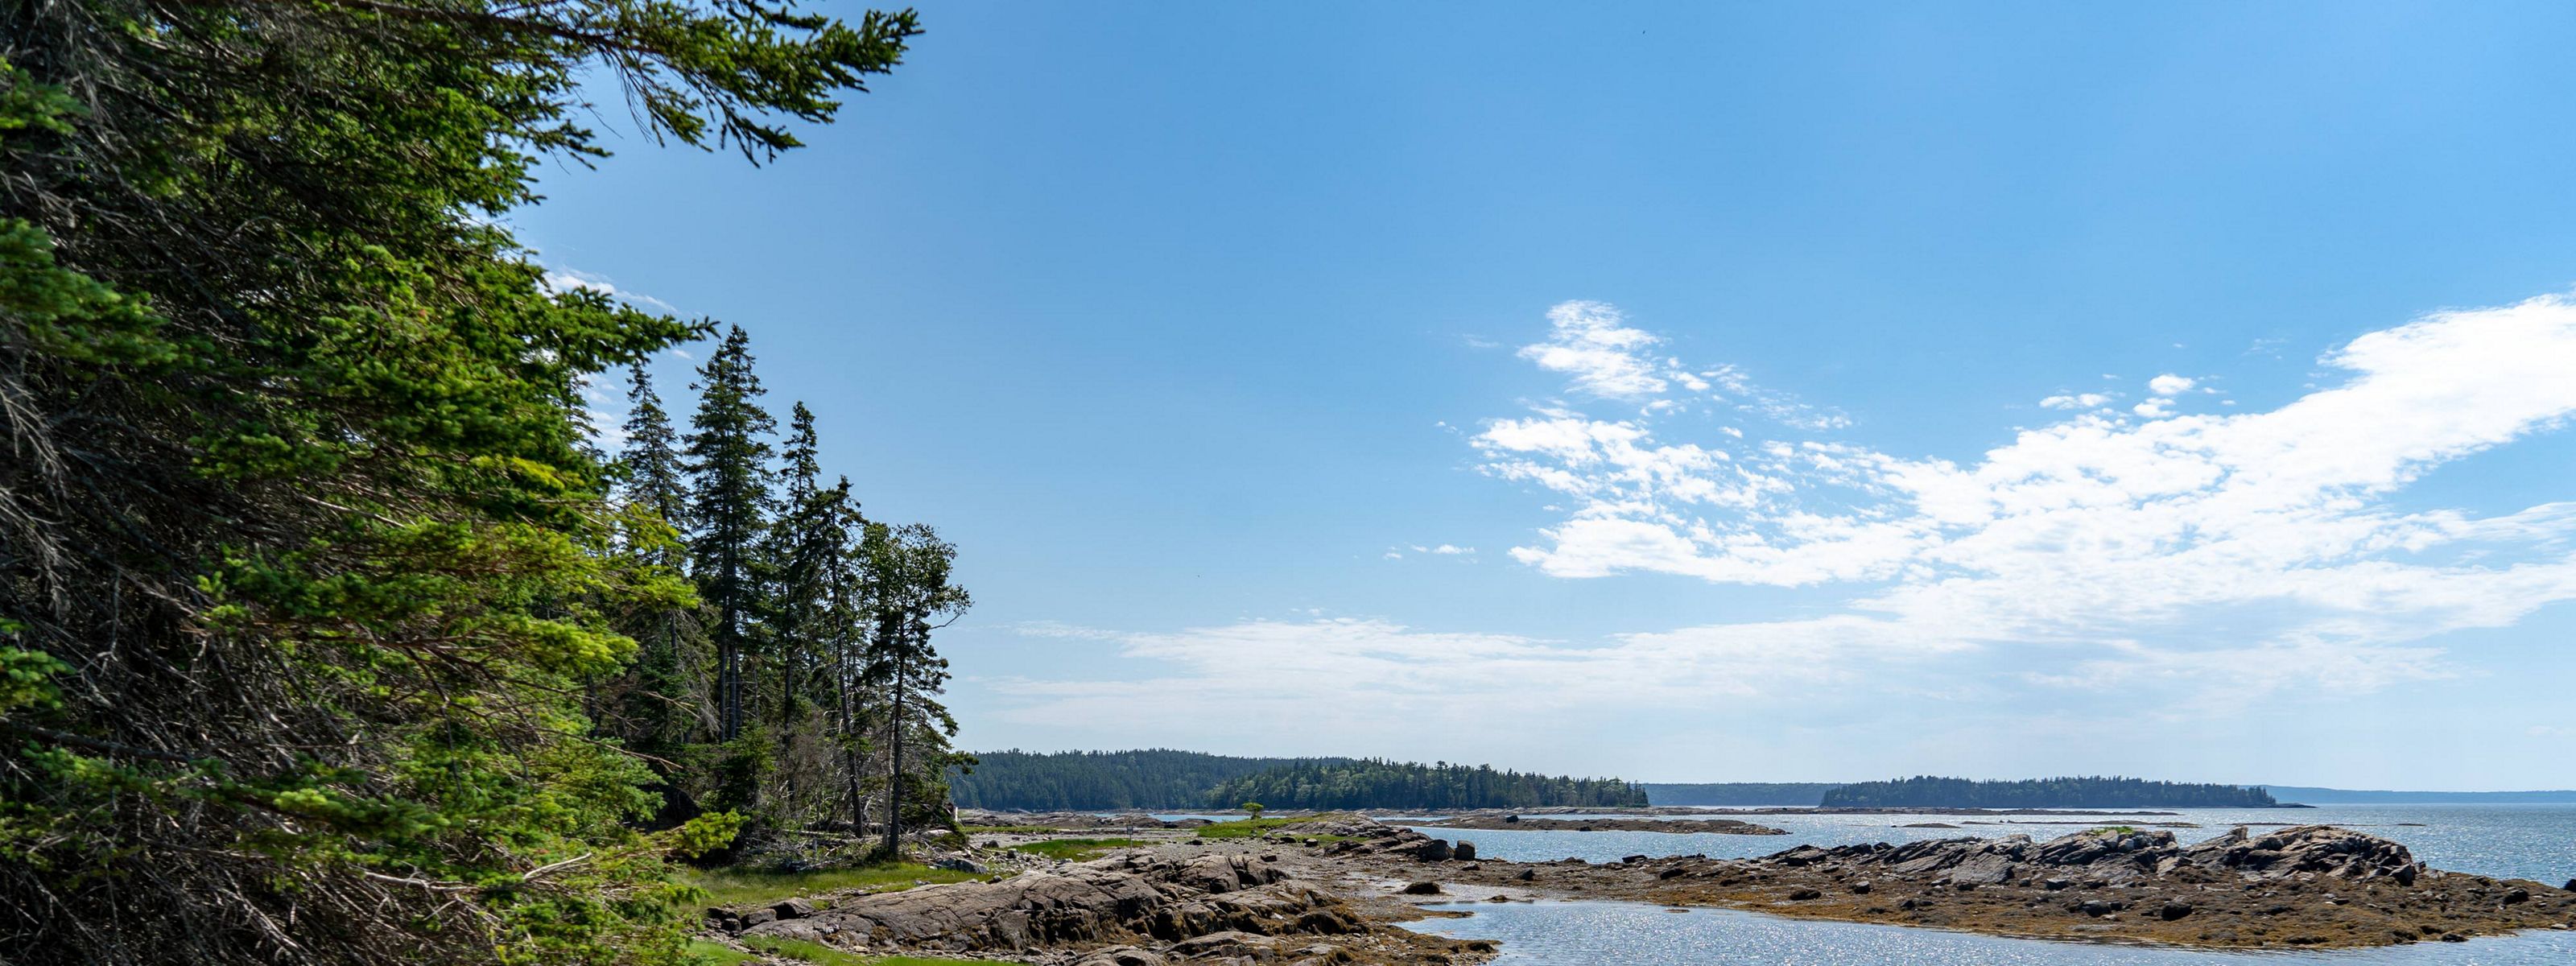 View along the rocky shoreline on the Maine coast.